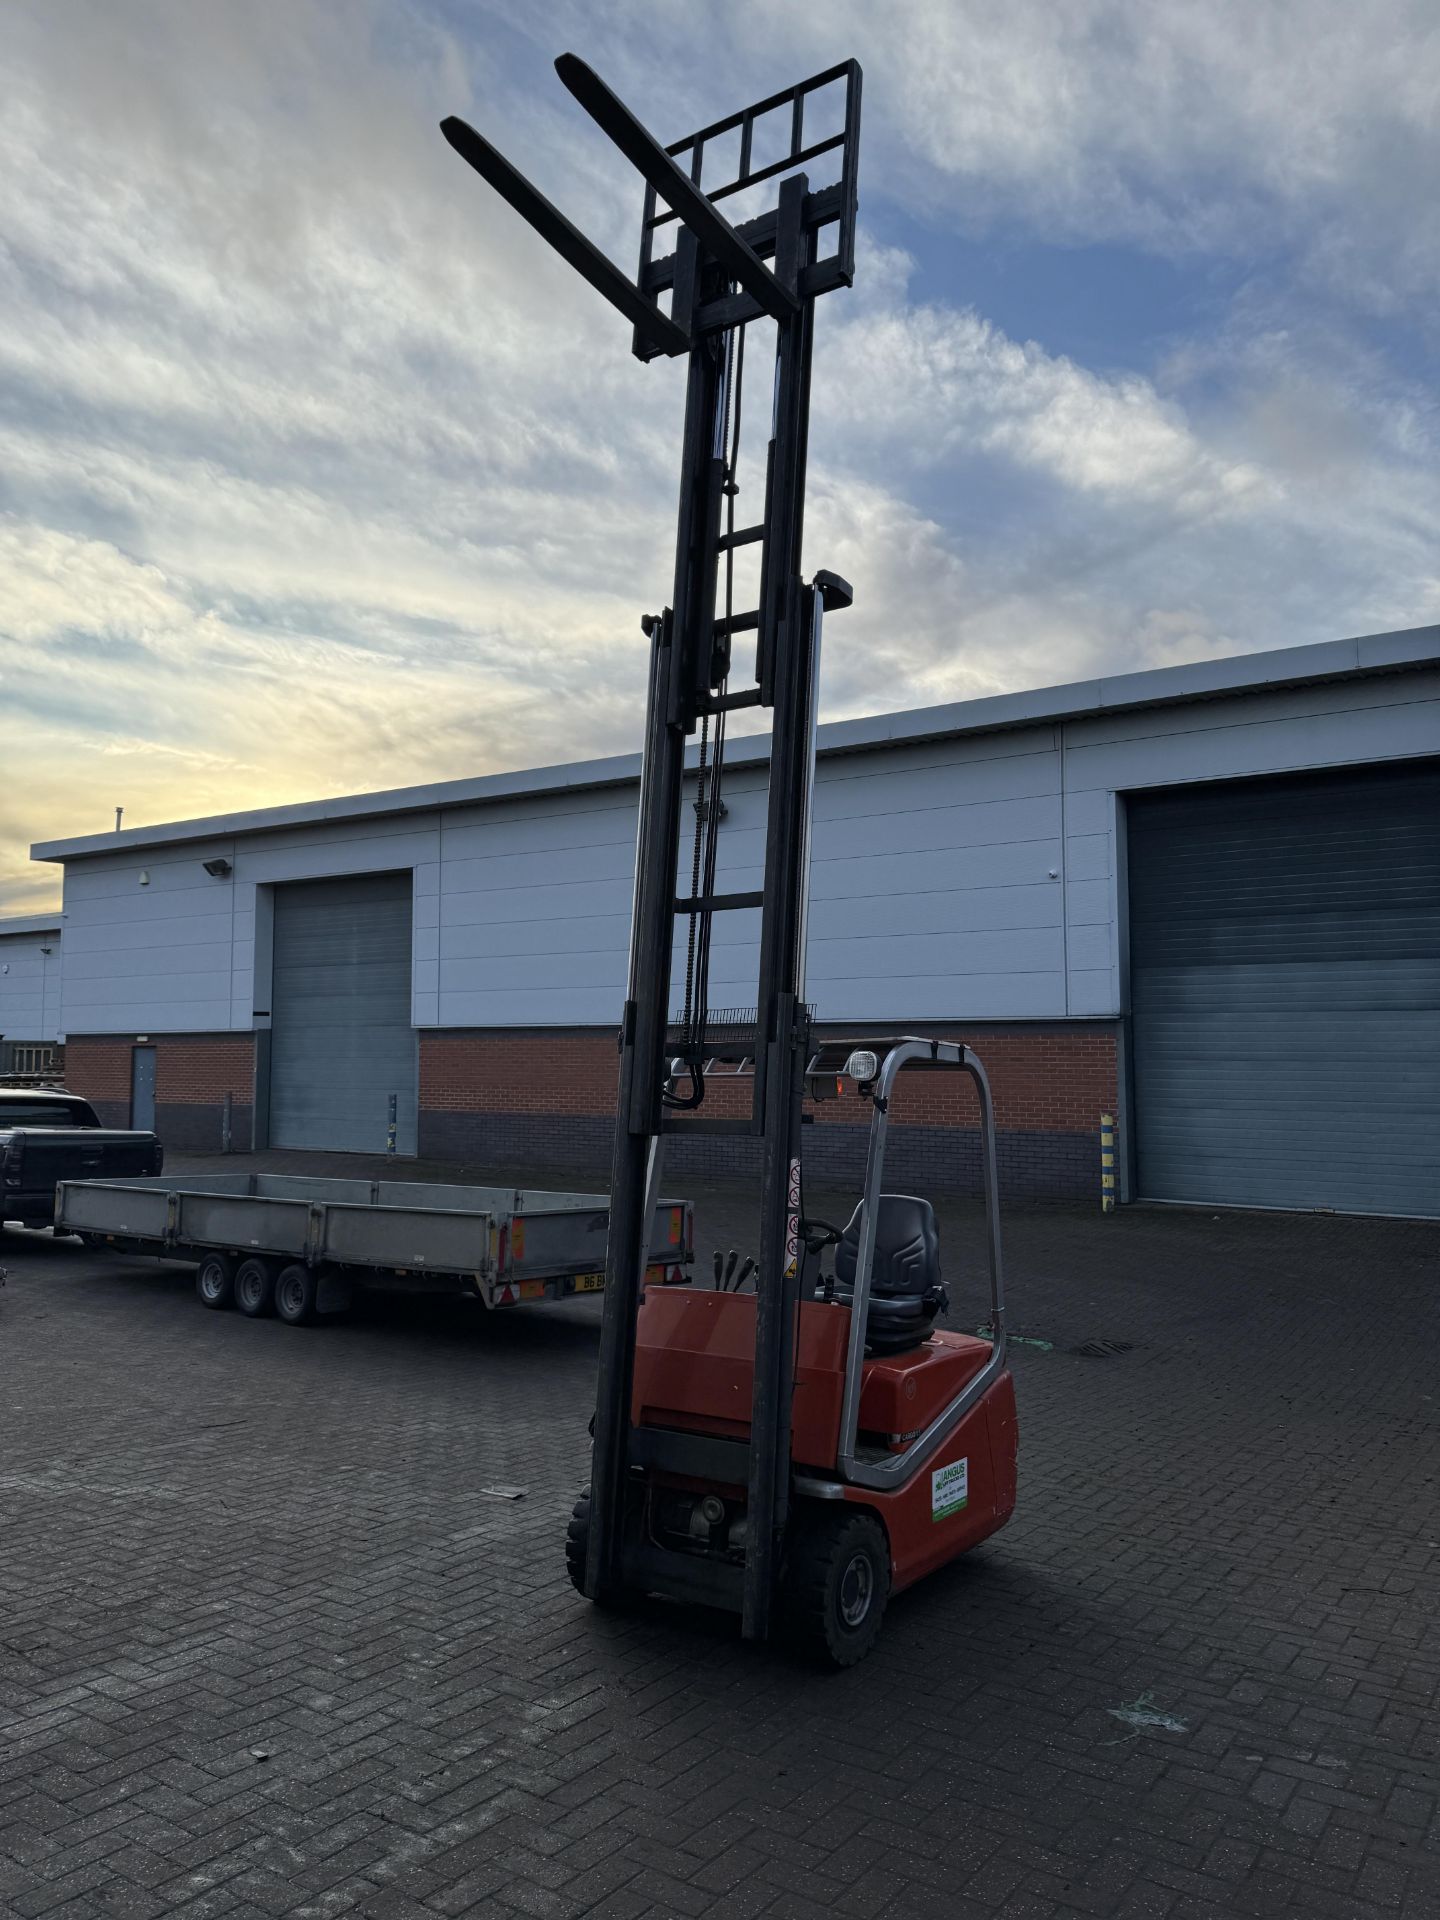 Cargo Model C 3 E 150 Tri Wheel Container Specification Electric Reach Truck - Image 12 of 28